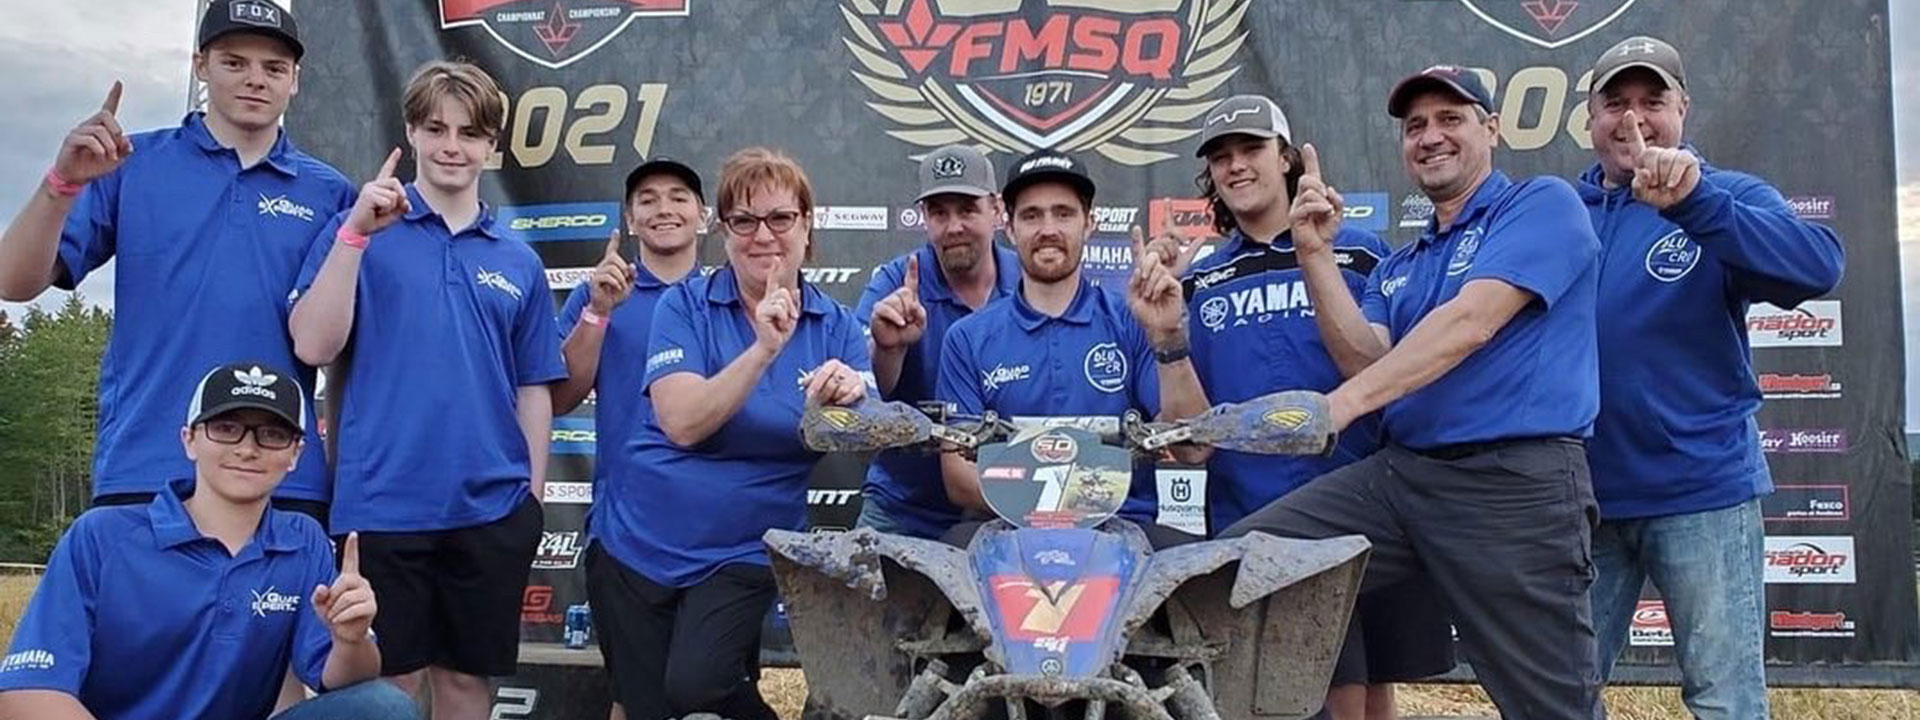 WHAT DOES IT TAKE TO BE A NATIONAL ATV CHAMPION?